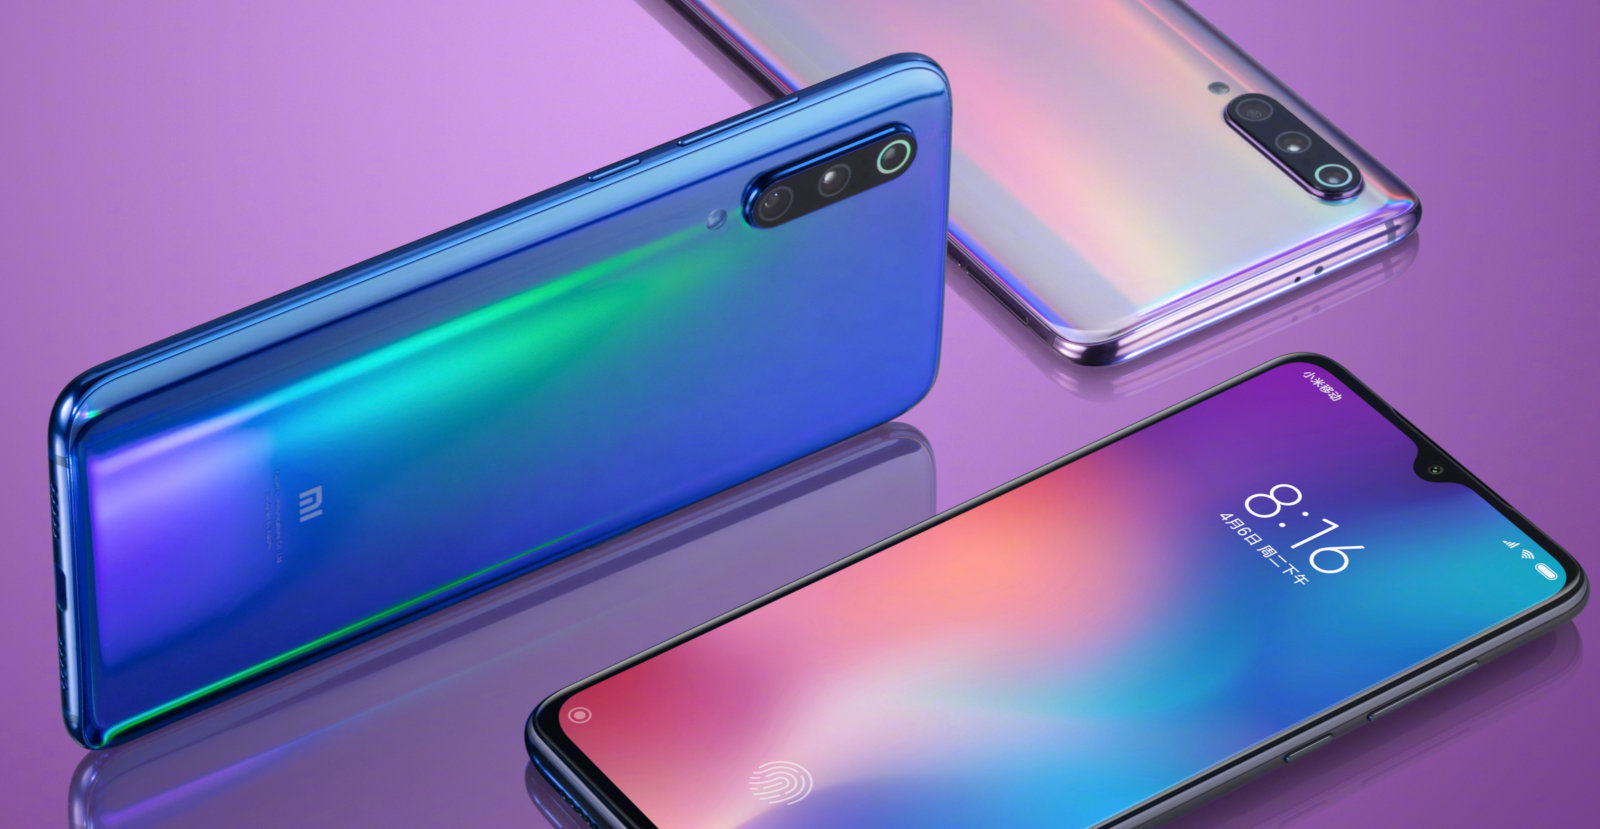 xiaomi mi 9 specifications and features